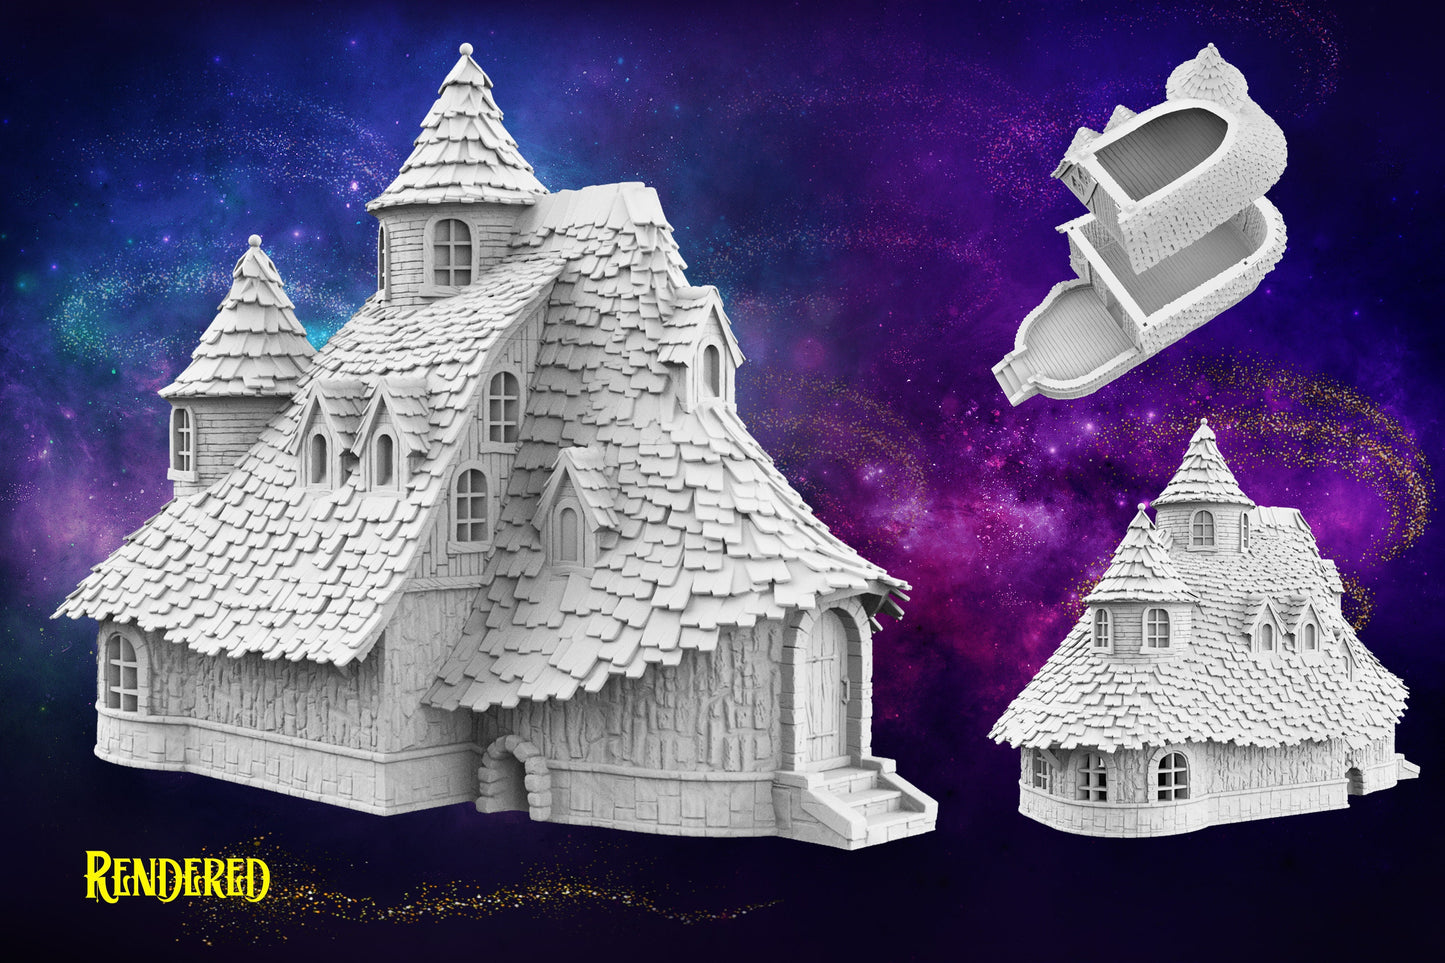 3D Printed 2 Storey Large Wizards House with Playable interior for Dungeons and Dragons, Wargaming and Tabletop games.  DnD, Warhammer